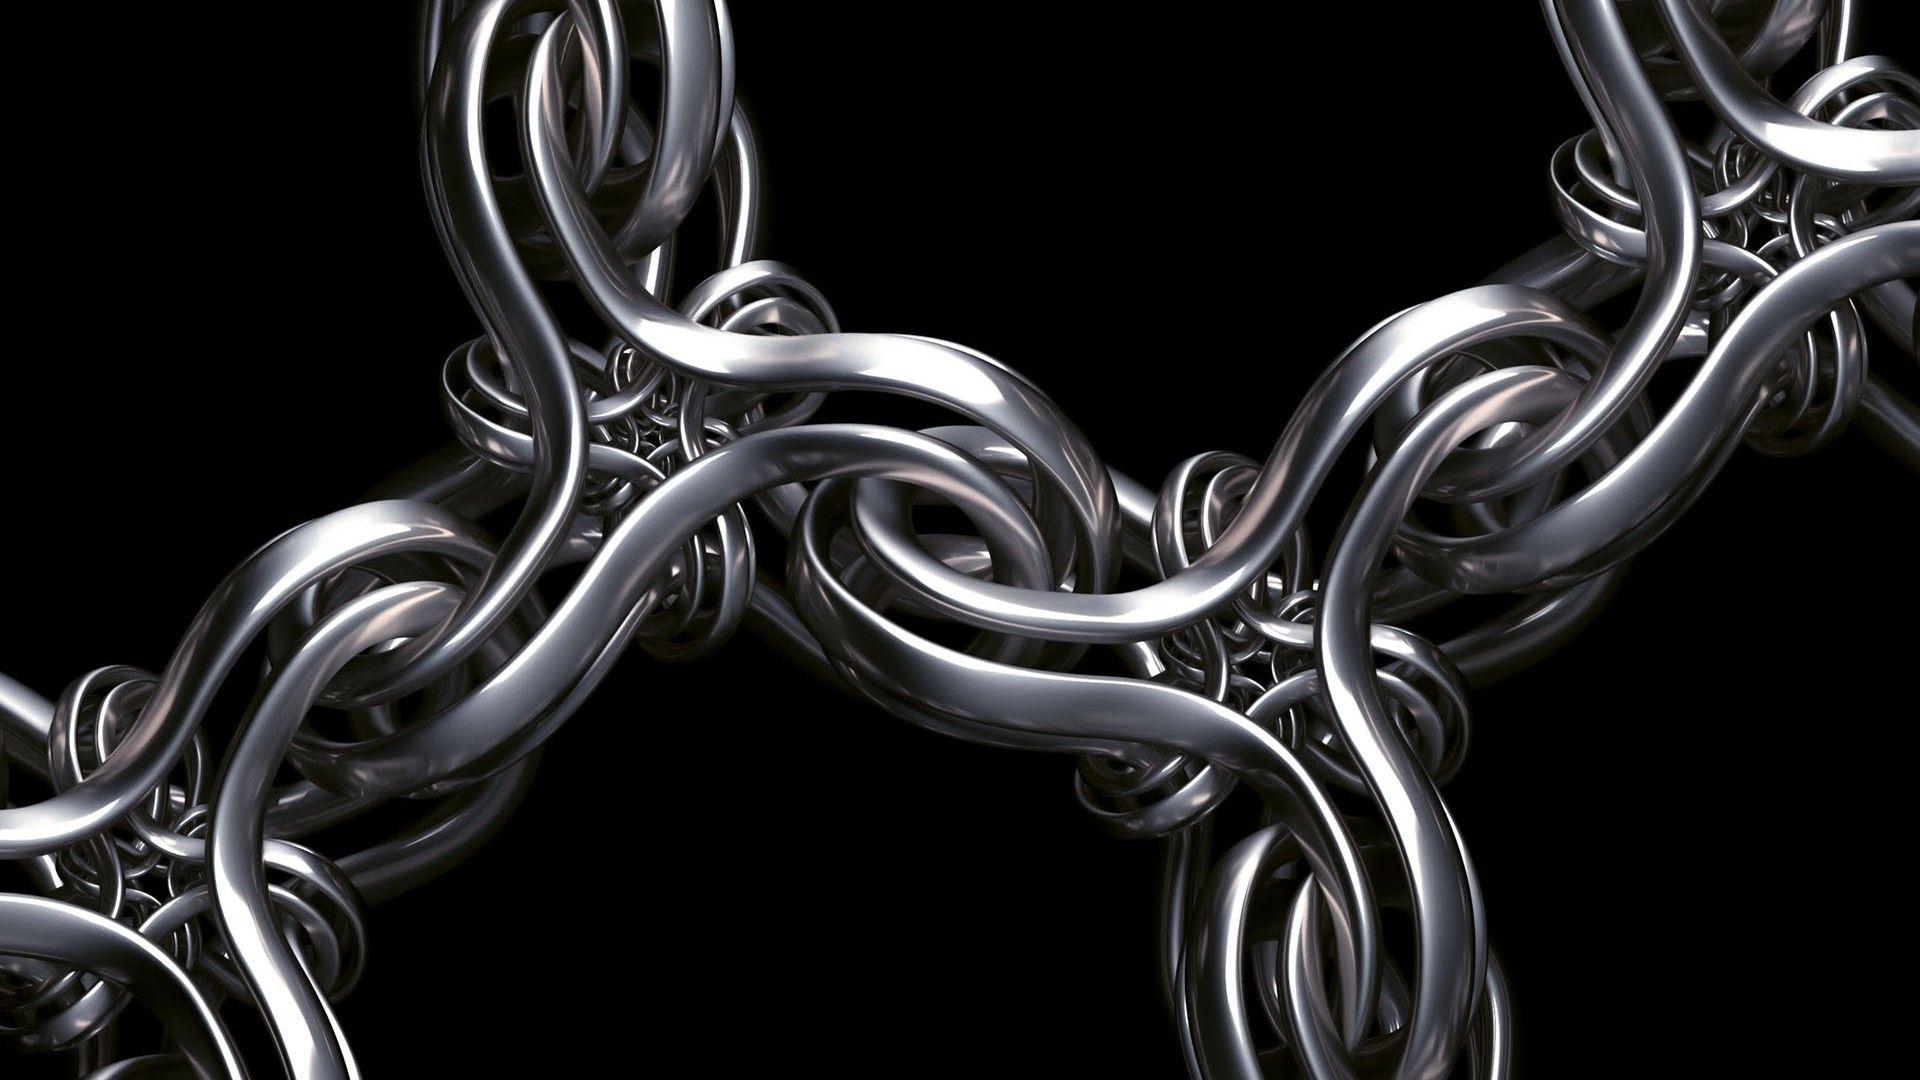 Wallpaper, abstract, metal, silver, chain, 1920x1080 px, Adobe